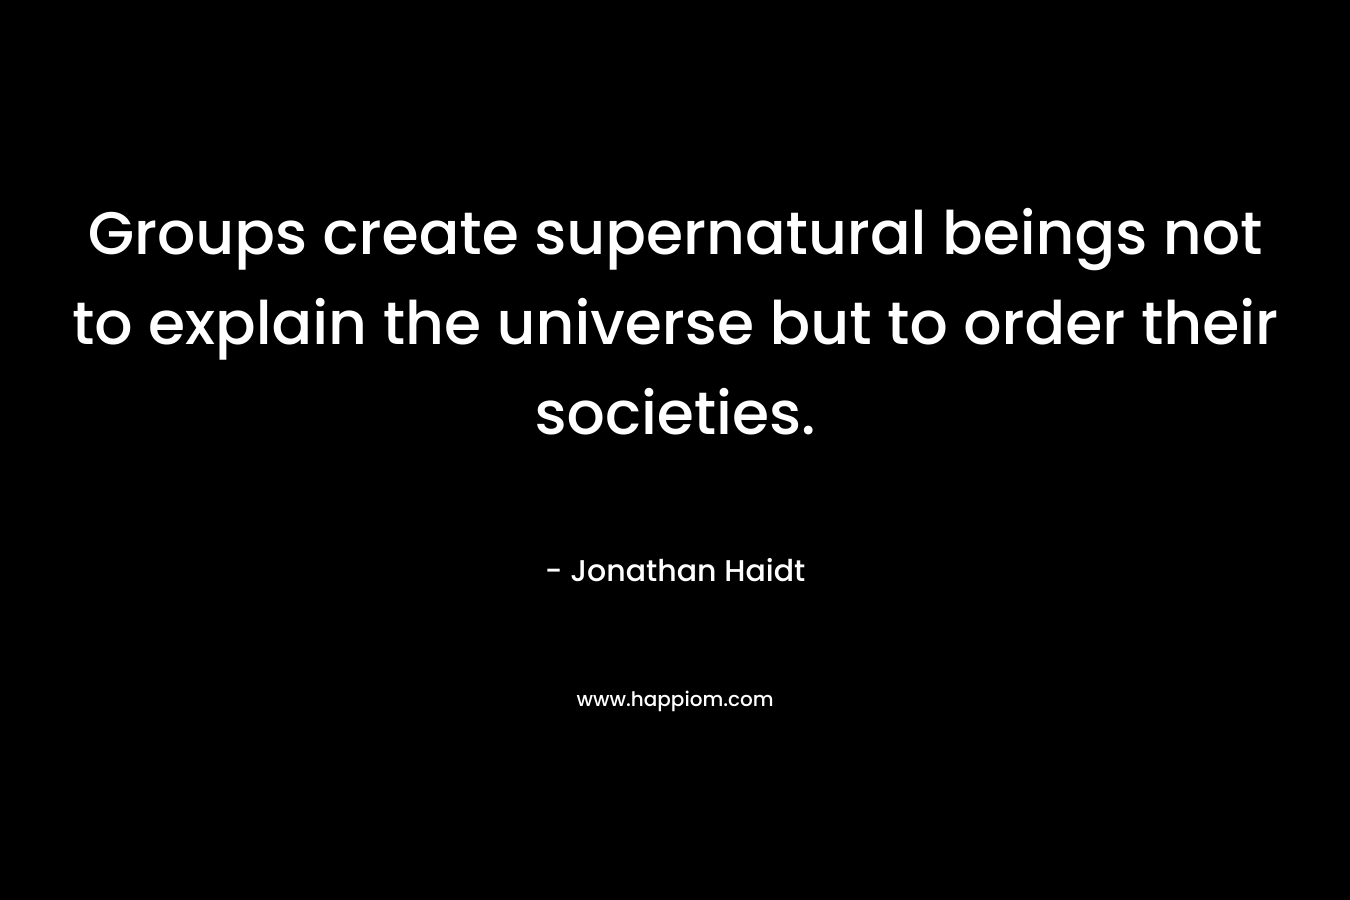 Groups create supernatural beings not to explain the universe but to order their societies.